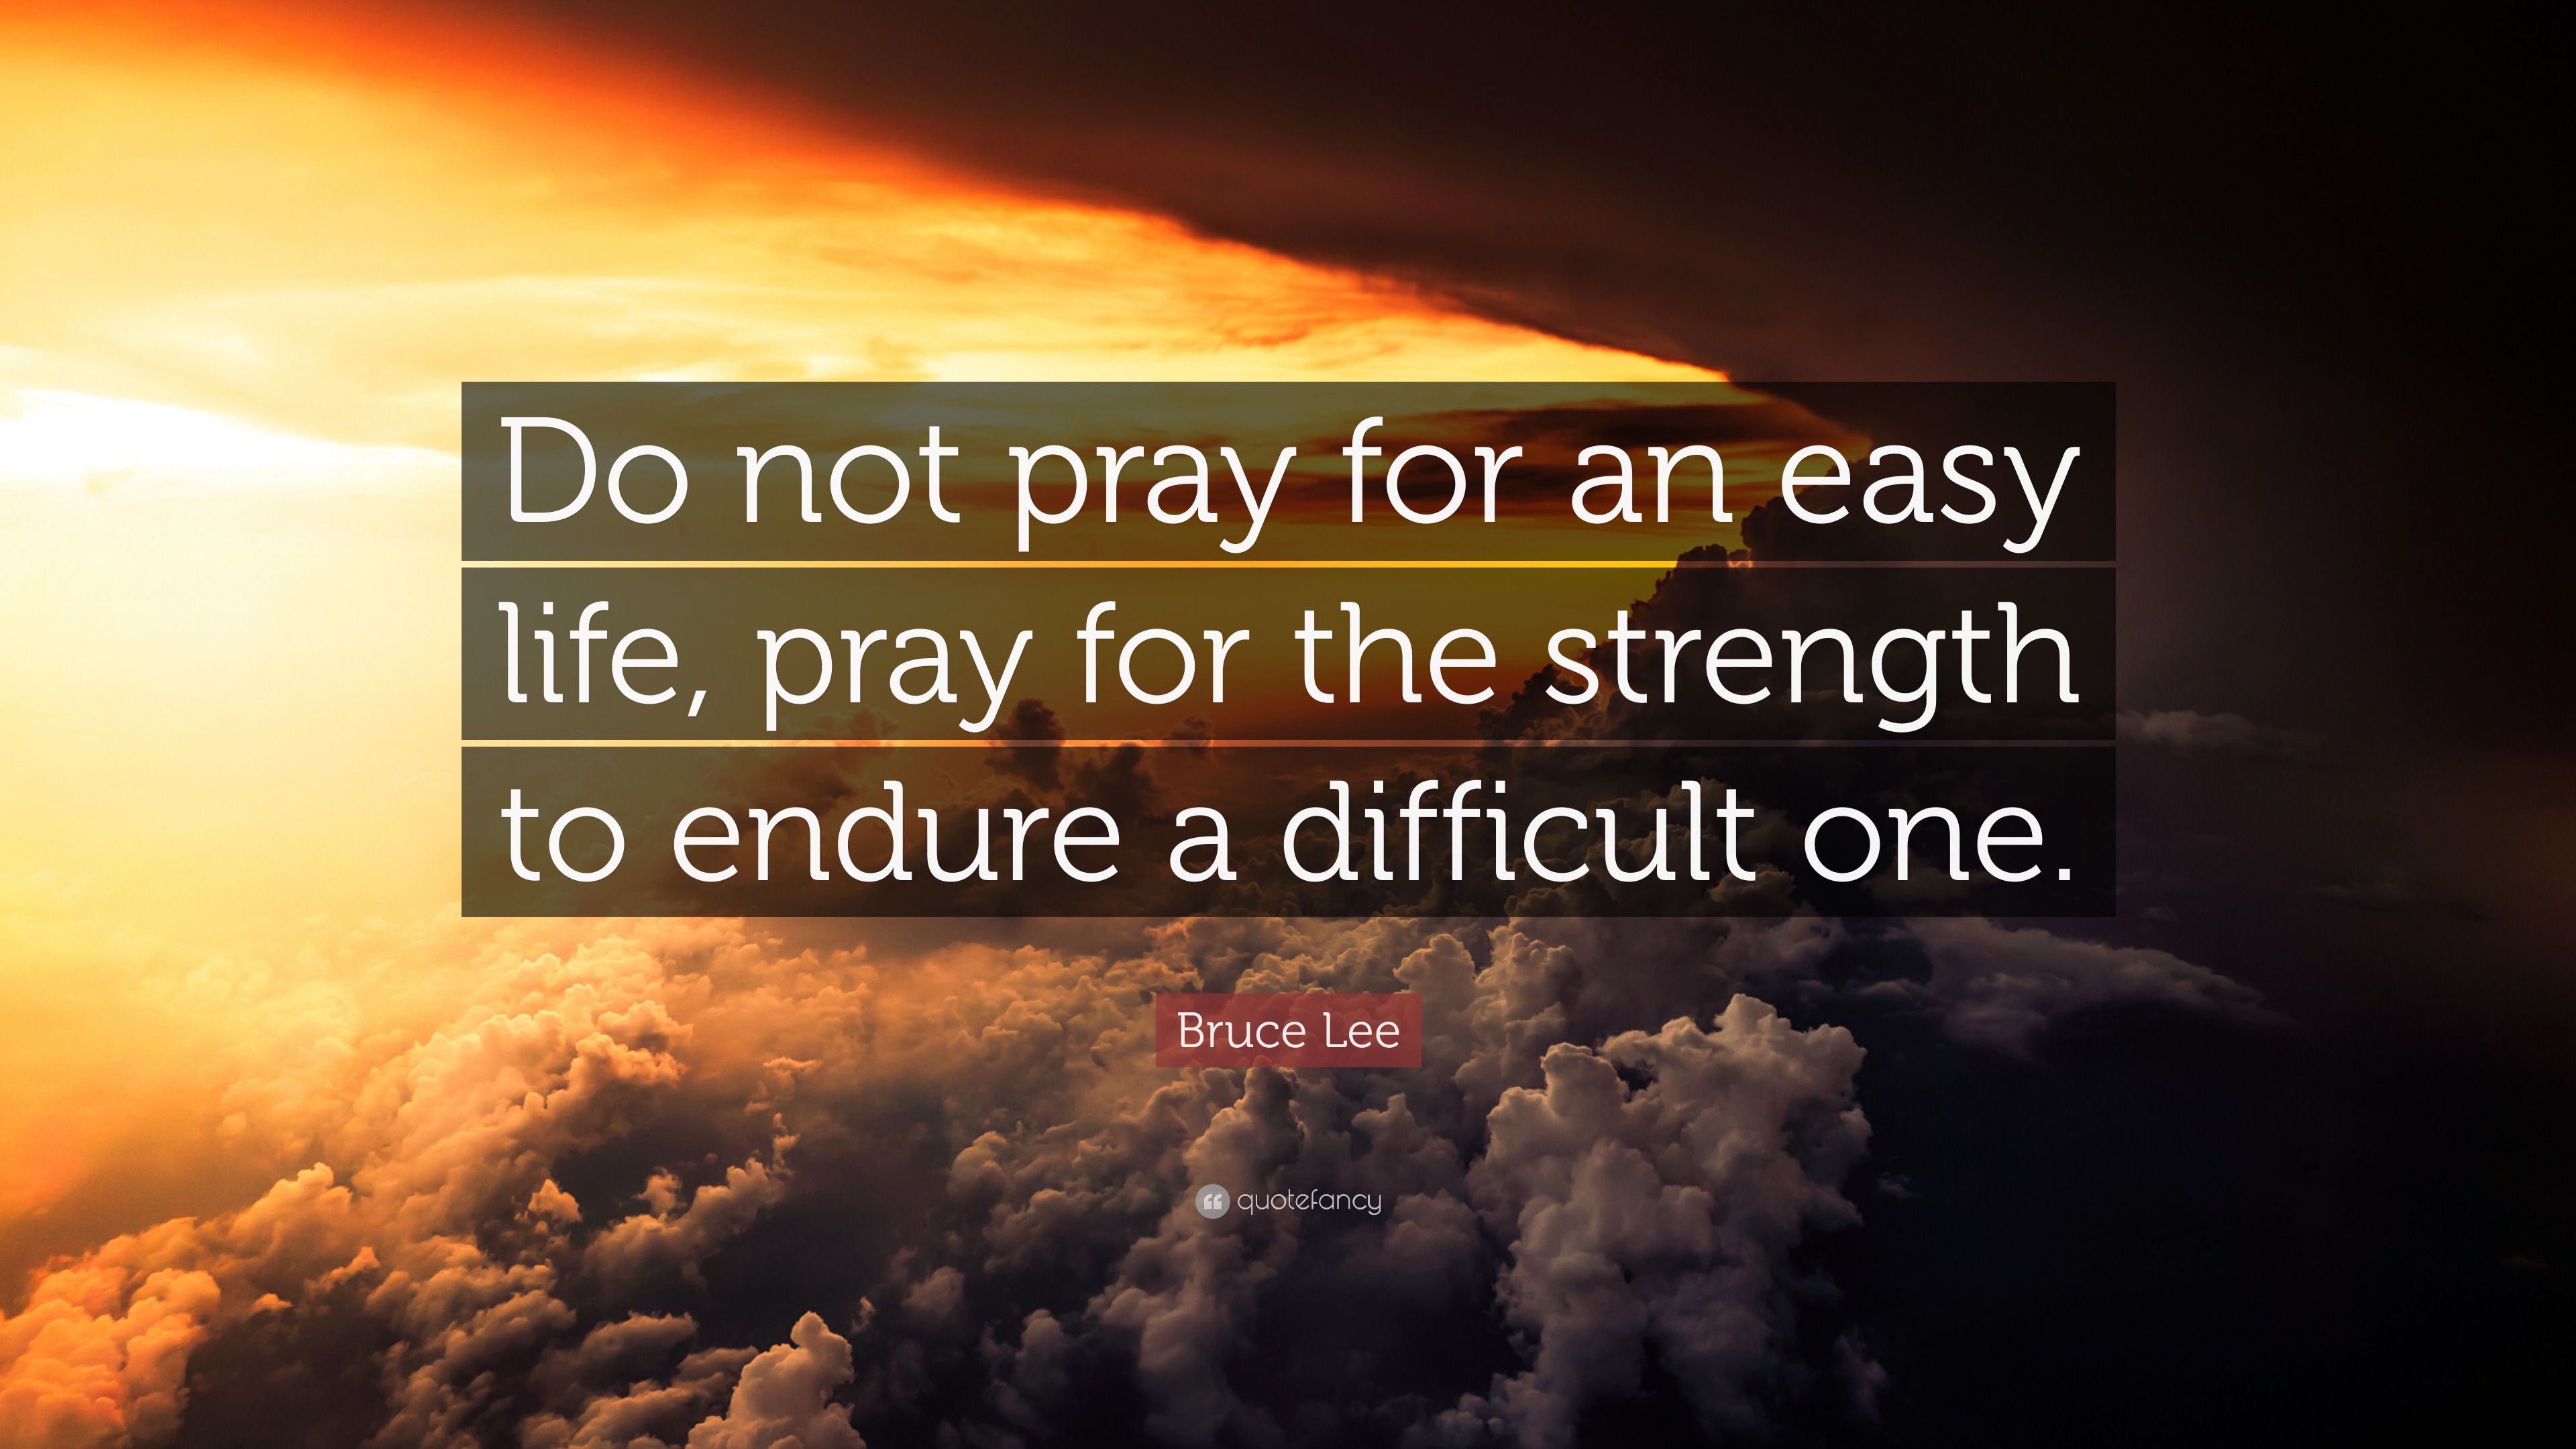 Bruce Lee Quote: "Do not pray for an easy life, pray for ...